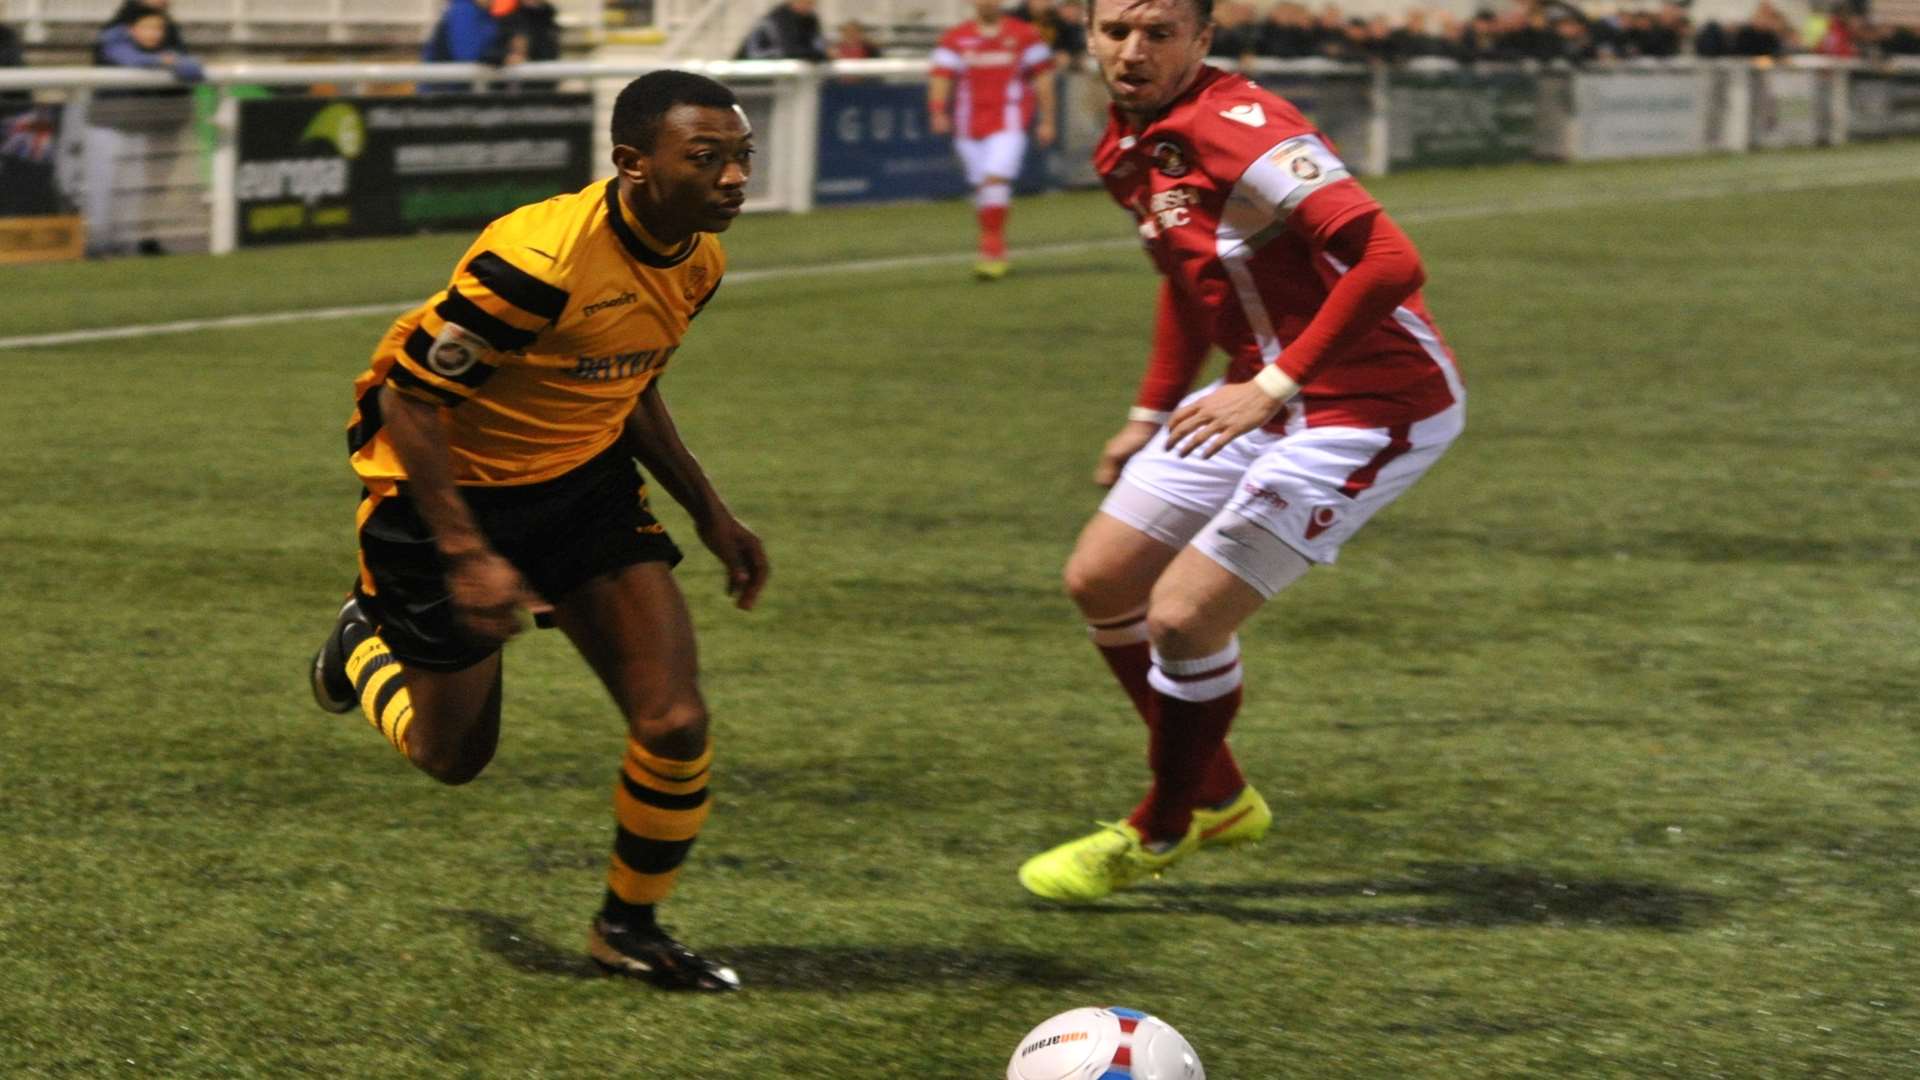 Charles Banya shows attacking intent at against Ebbsfleet in the Kent Senior Cup Picture: Steve Terrell